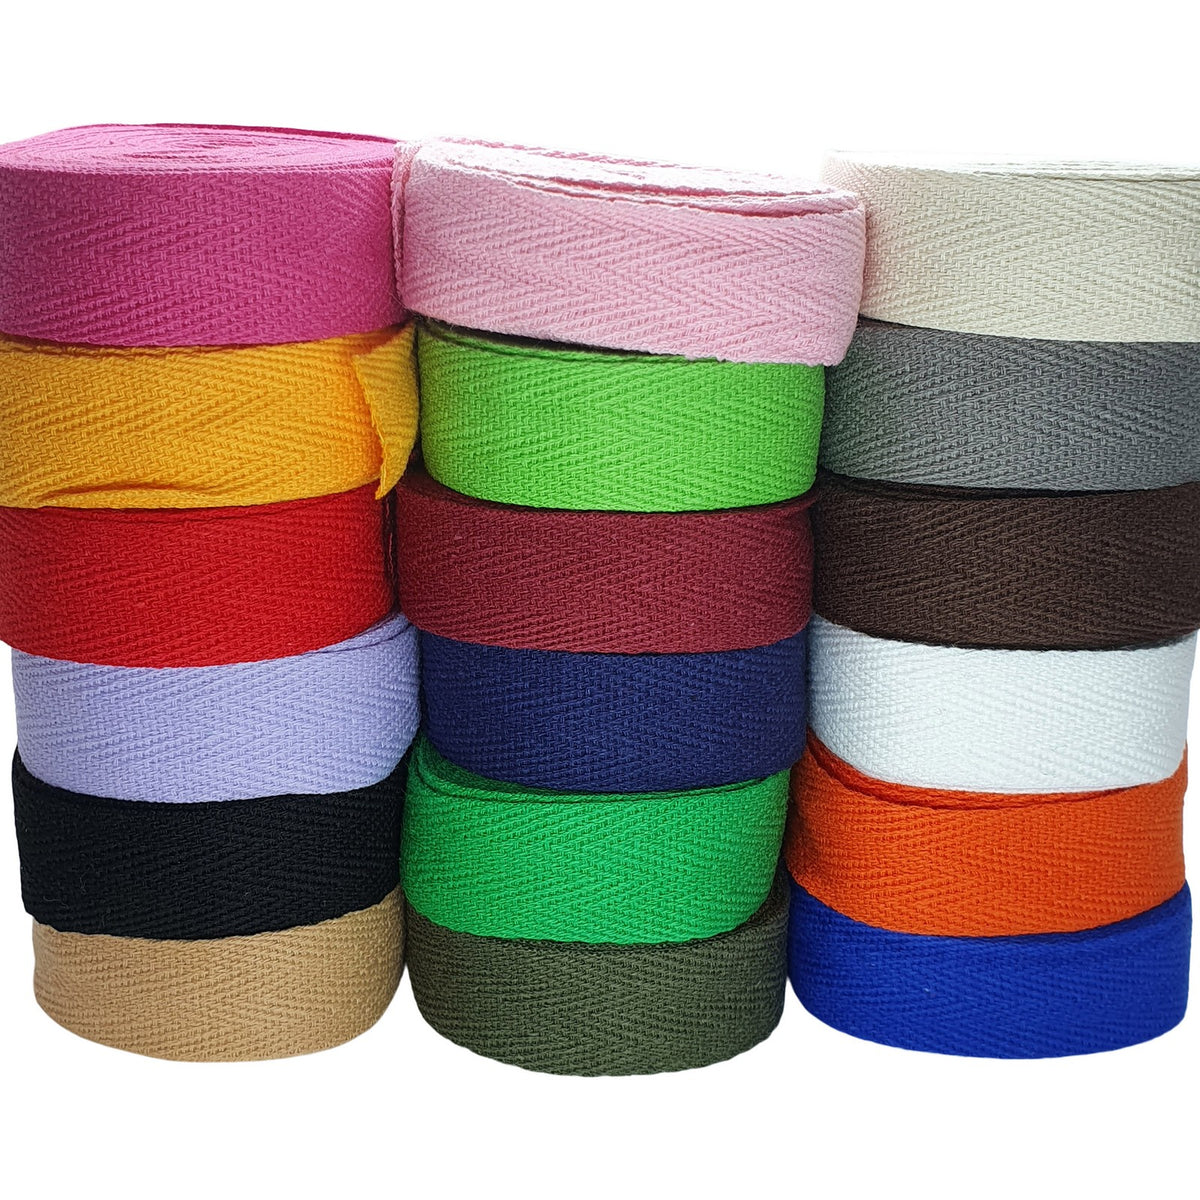 NBEADS 54.68 Yards(50m)/Roll Cotton Tape Ribbons, Herringbone Cotton  Webbings, 30mm Wide Flat Cotton Herringbone Cords for Knit Sewing DIY  Crafts